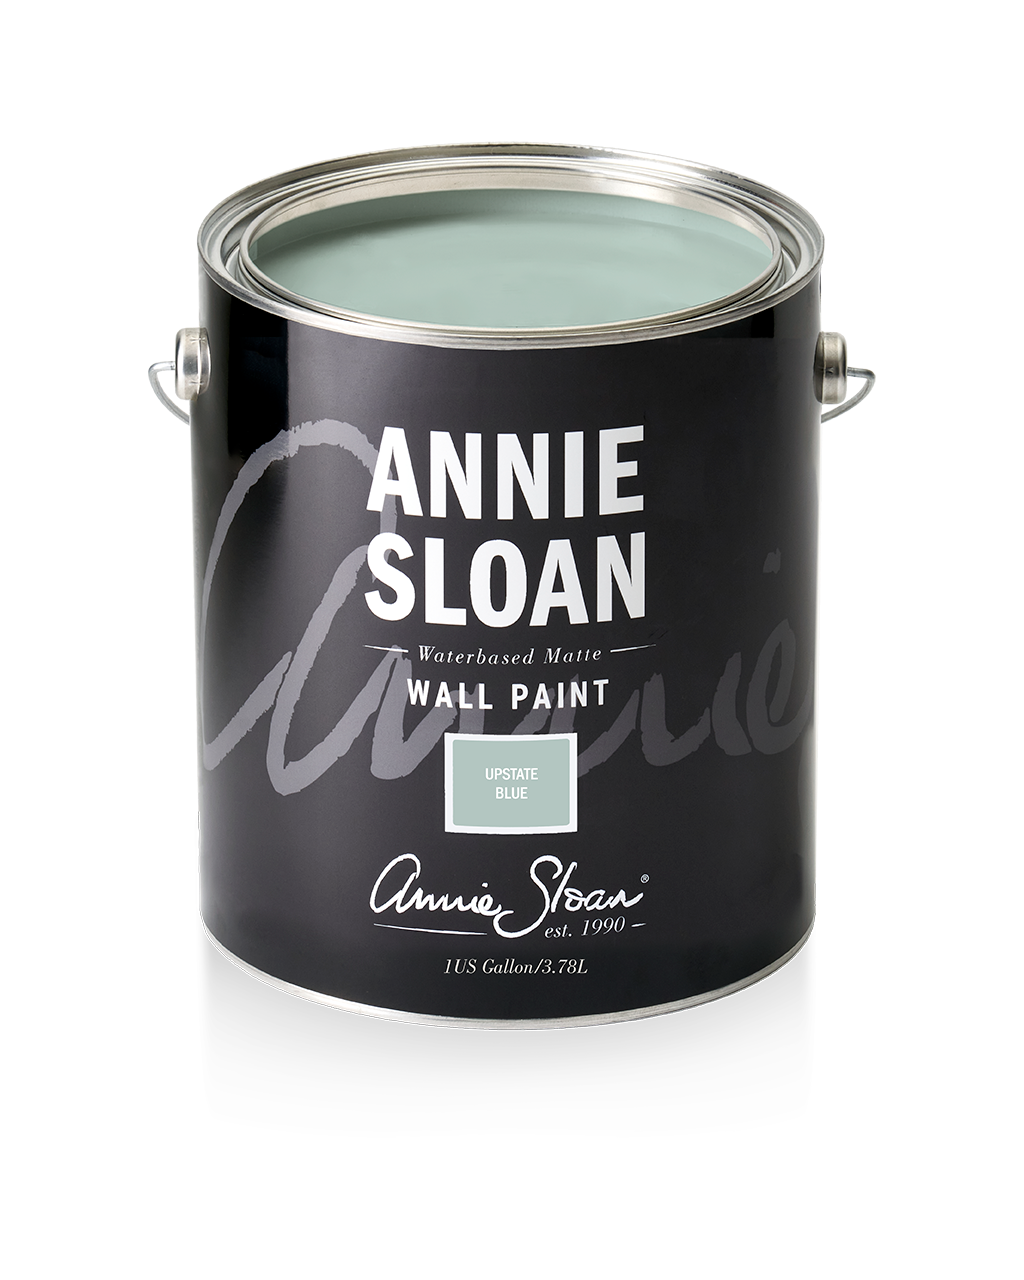 Upstate Blue, Annie Sloan Wall Paint®️